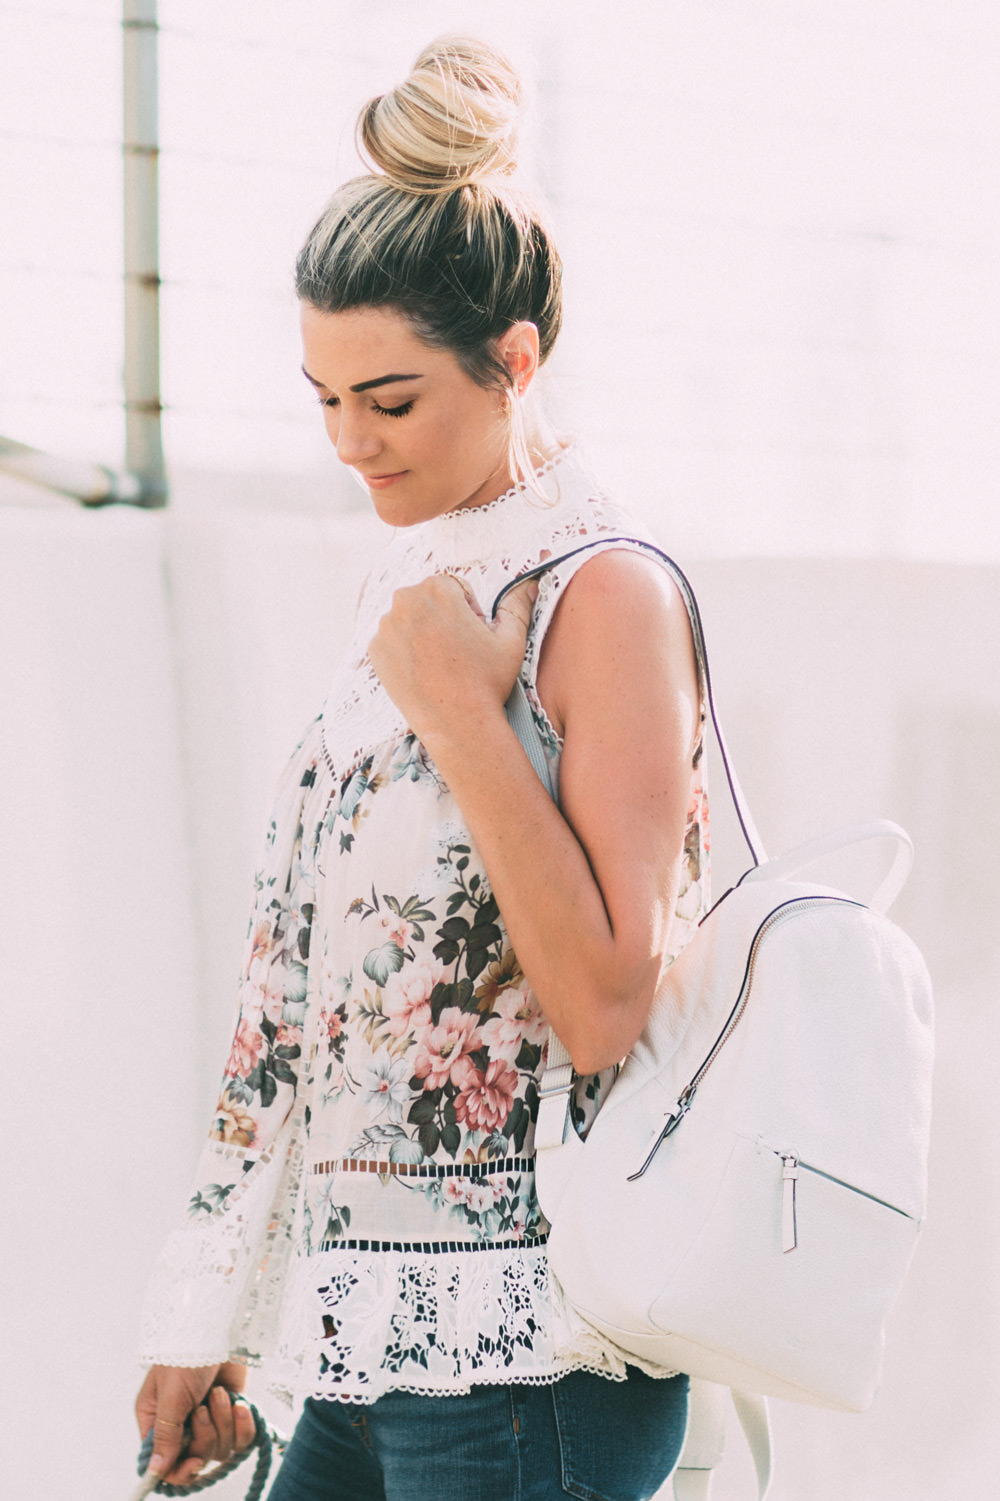 Caitlin Lindquist of the Arizona fashion blog Dash of Darling shares a casual outfit wearing a floral top, white backpack and spring sneakers